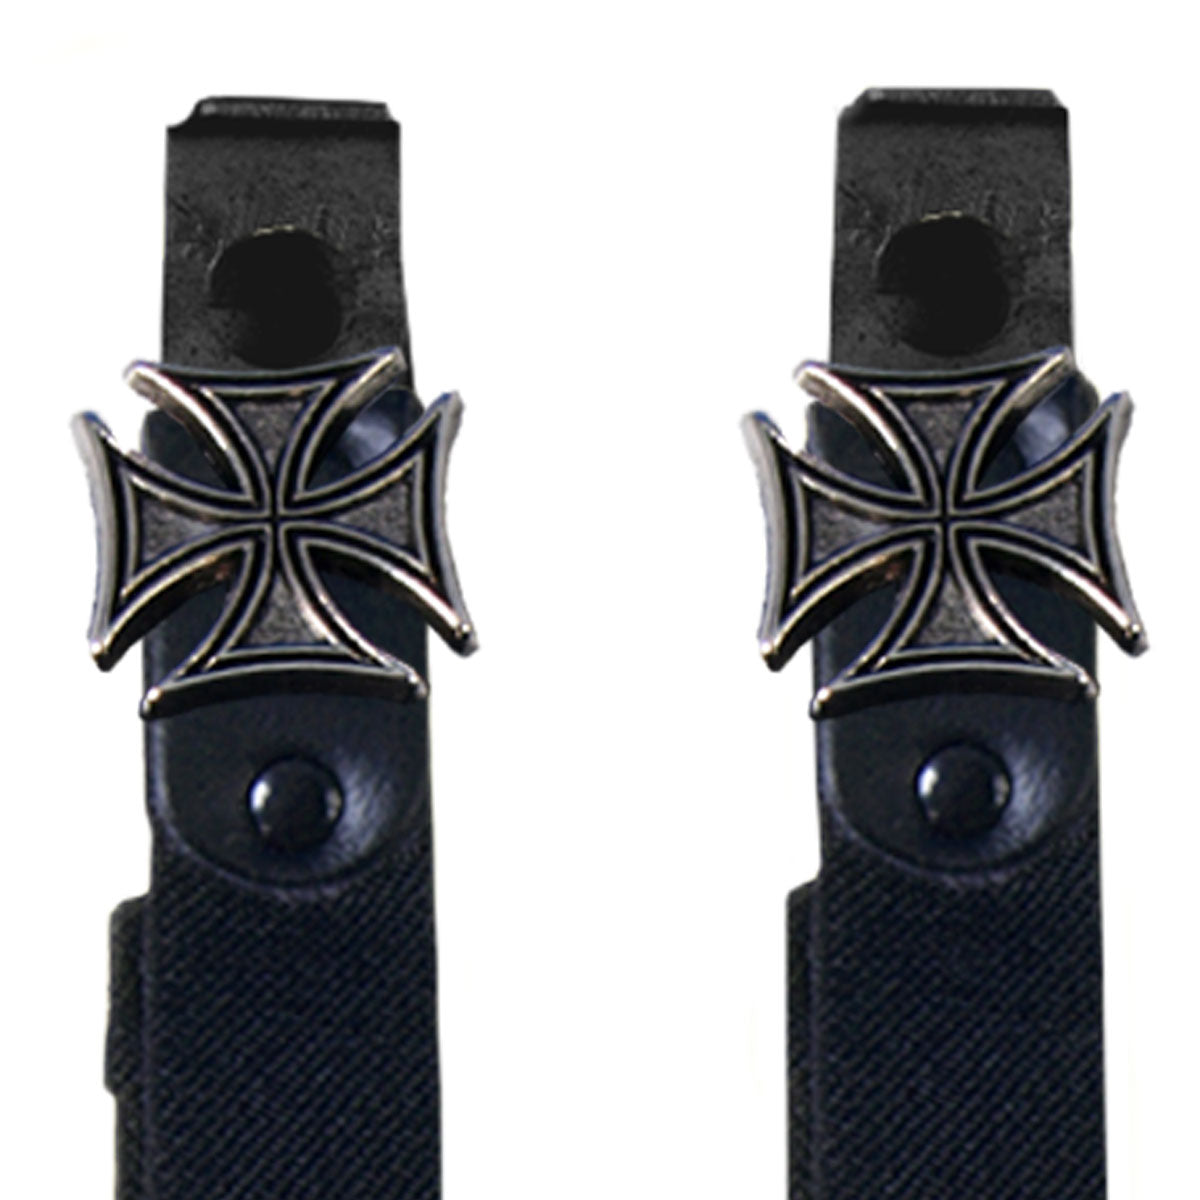 Hot Leathers Iron Cross Motorcycle Riding Pant Clips